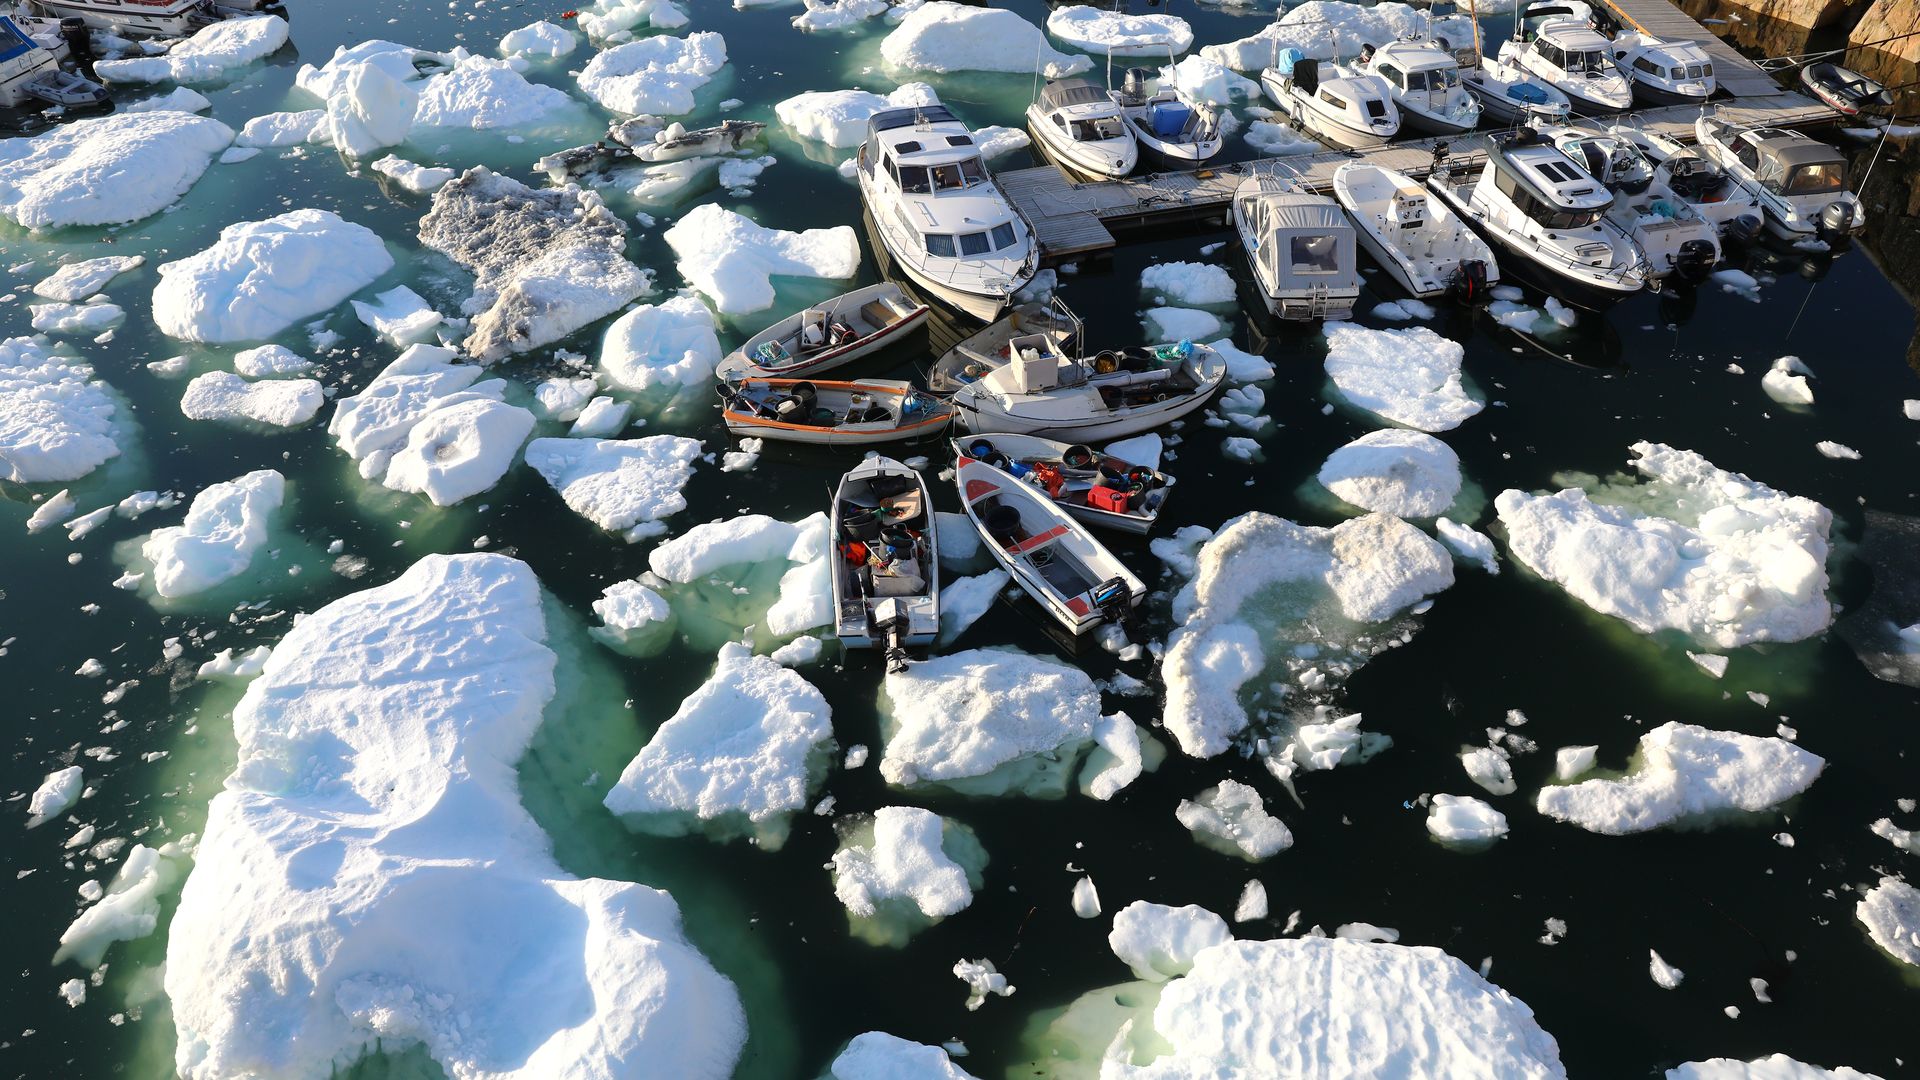 Boats among melting ice caps in Greenland